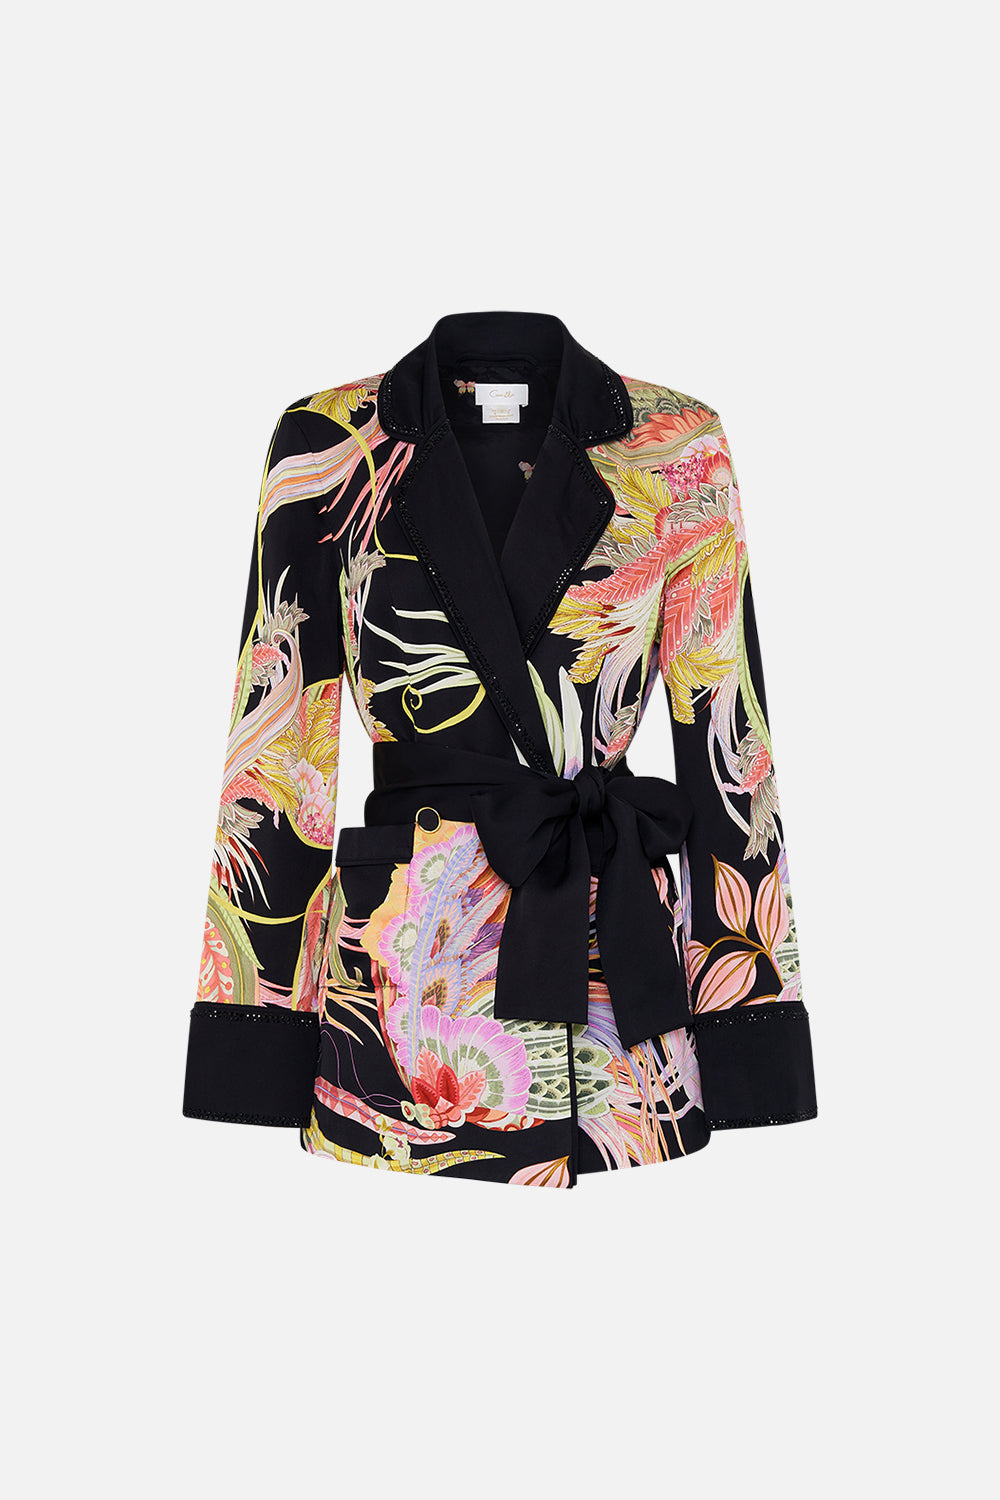 Product view of CAMILLA deisgner jacket in lady of The Moon Print